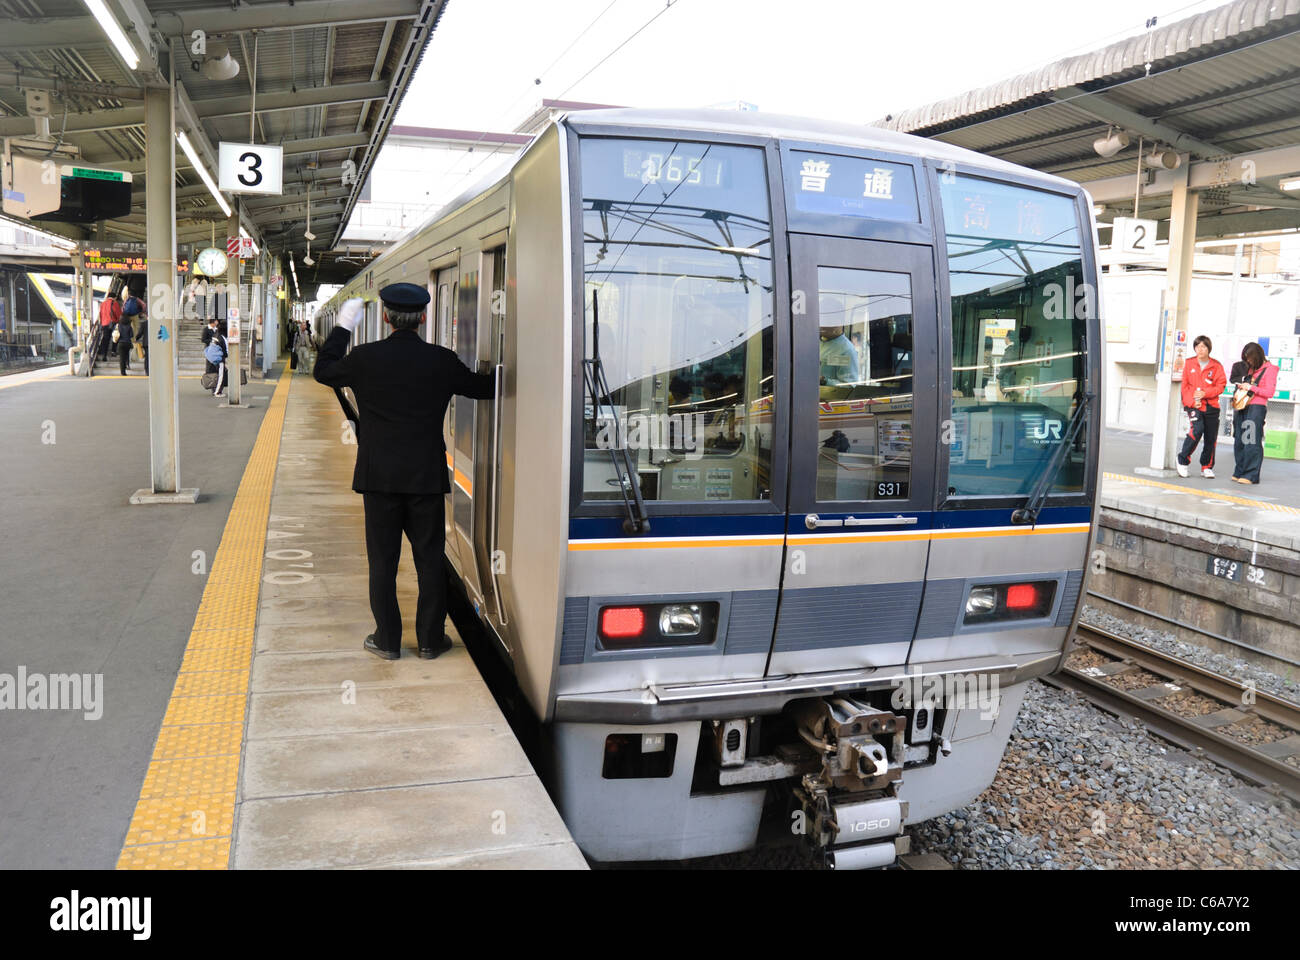 Guard of a Japanese commuter train signals the driver that it's safe to depart. Passenger train, Japan. Stock Photo